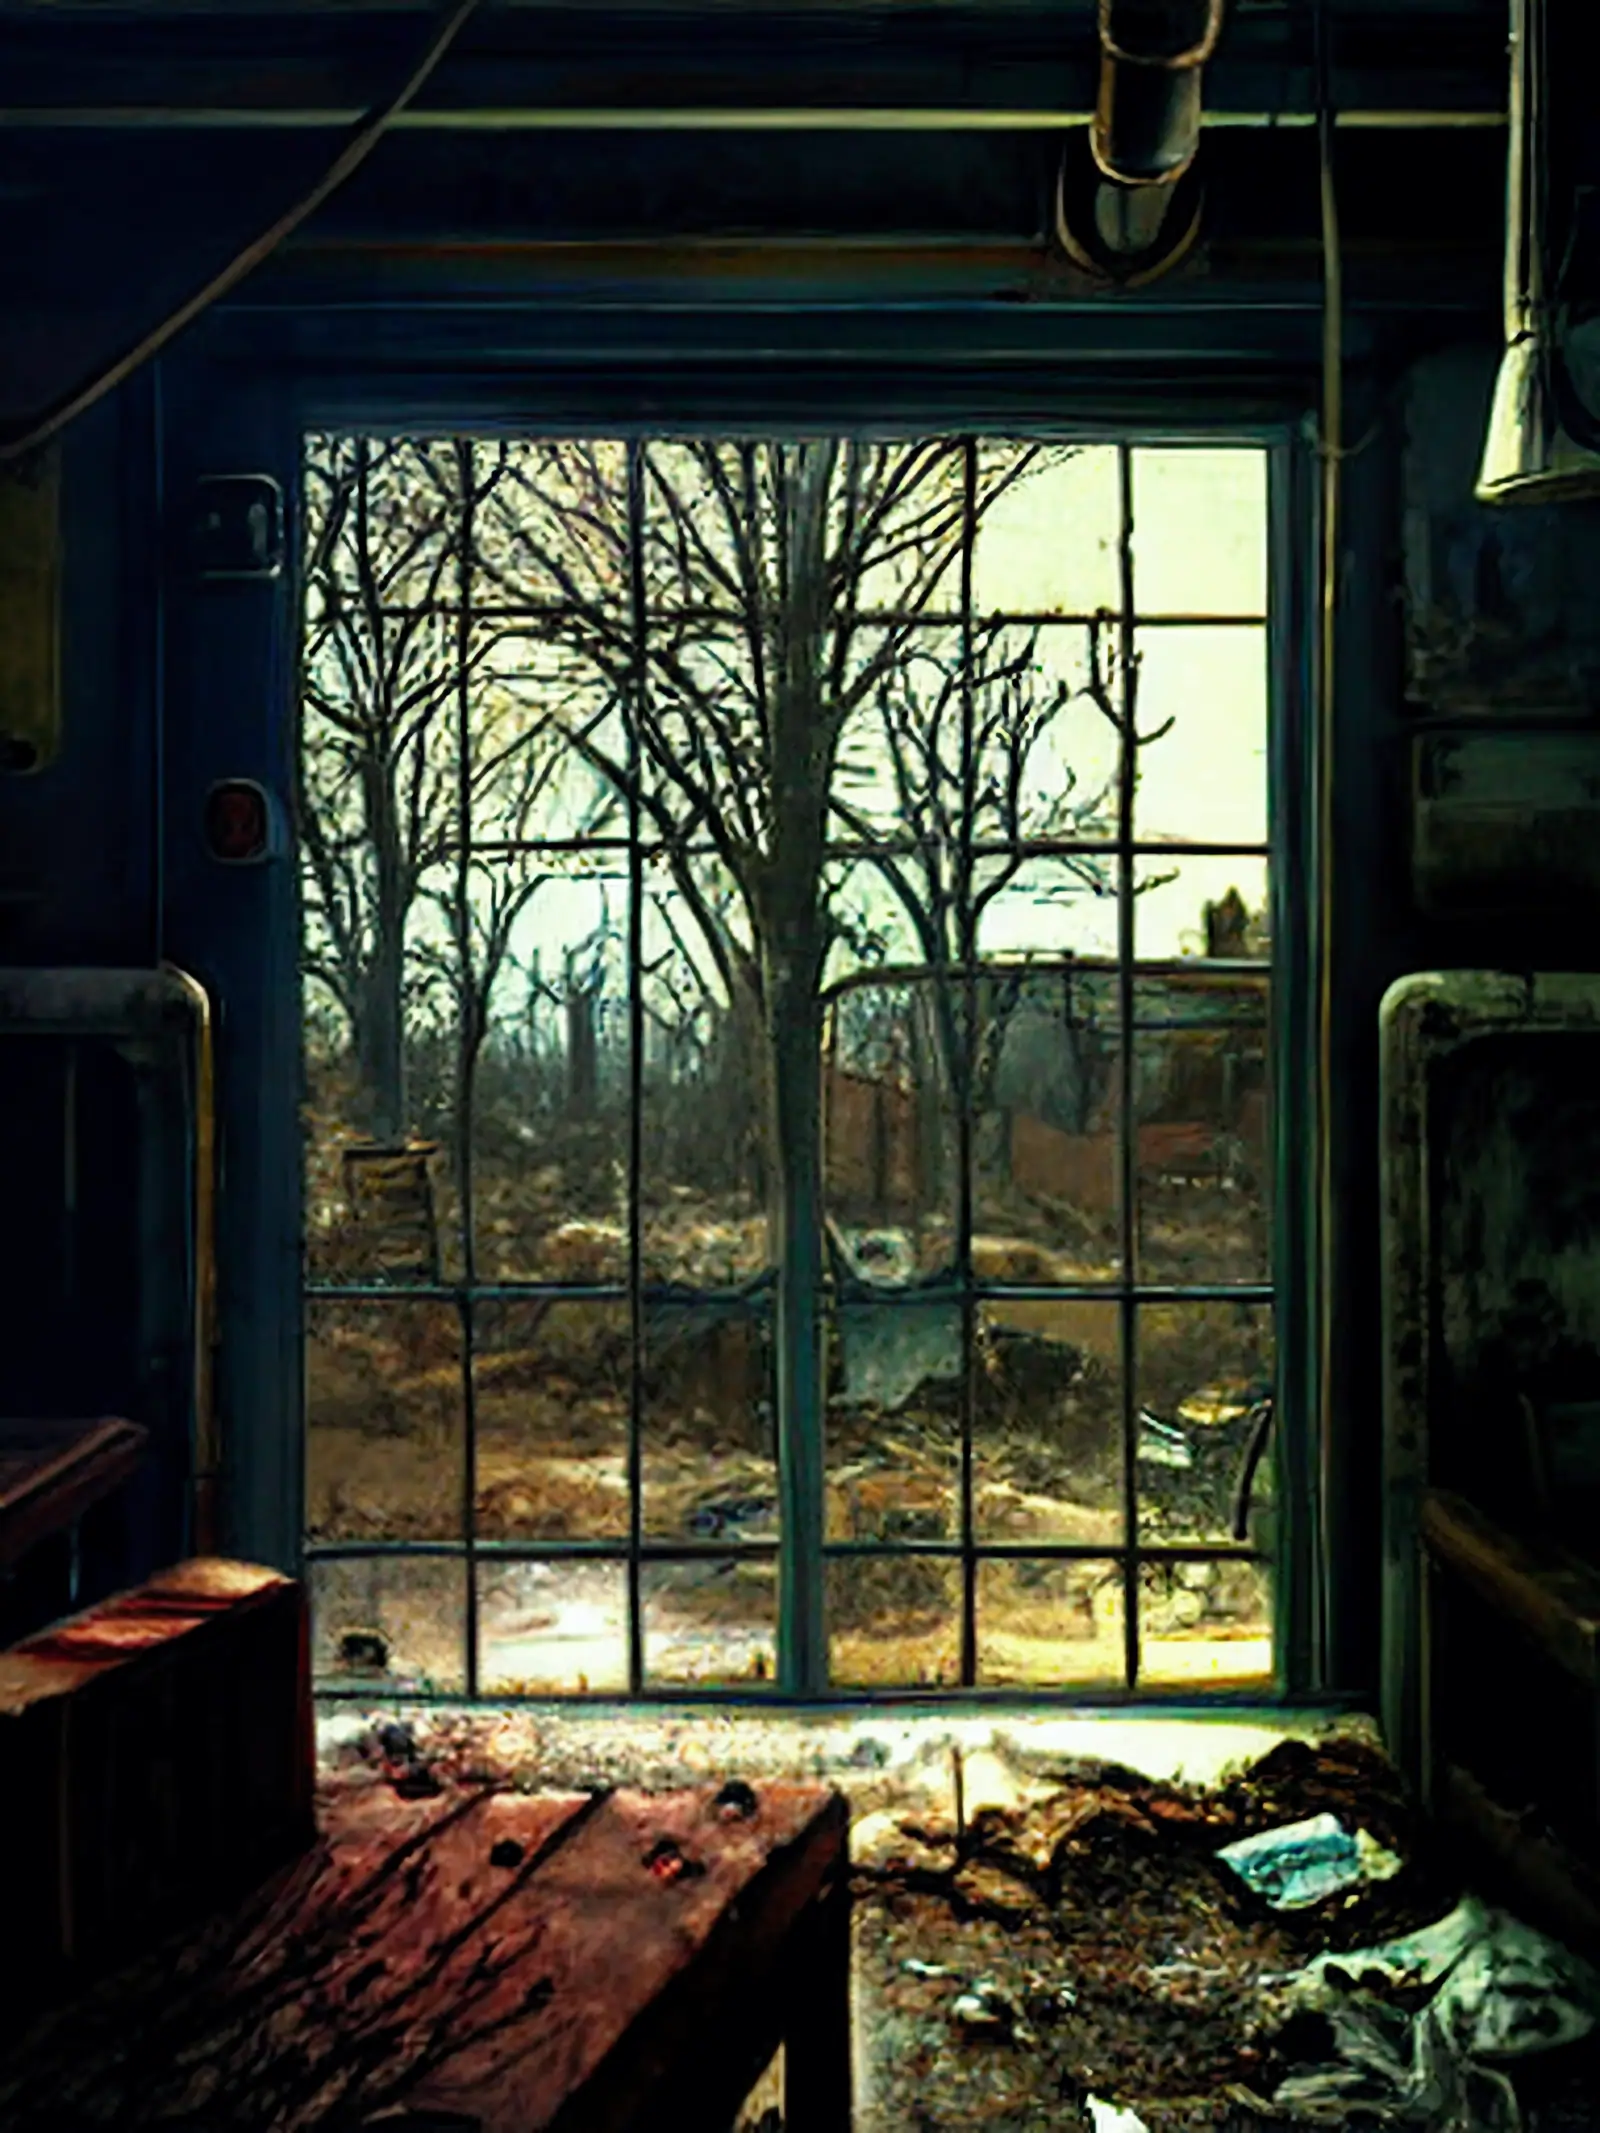 A window wall looking out into a bleak terrain while the interior of the room resembling the exterior